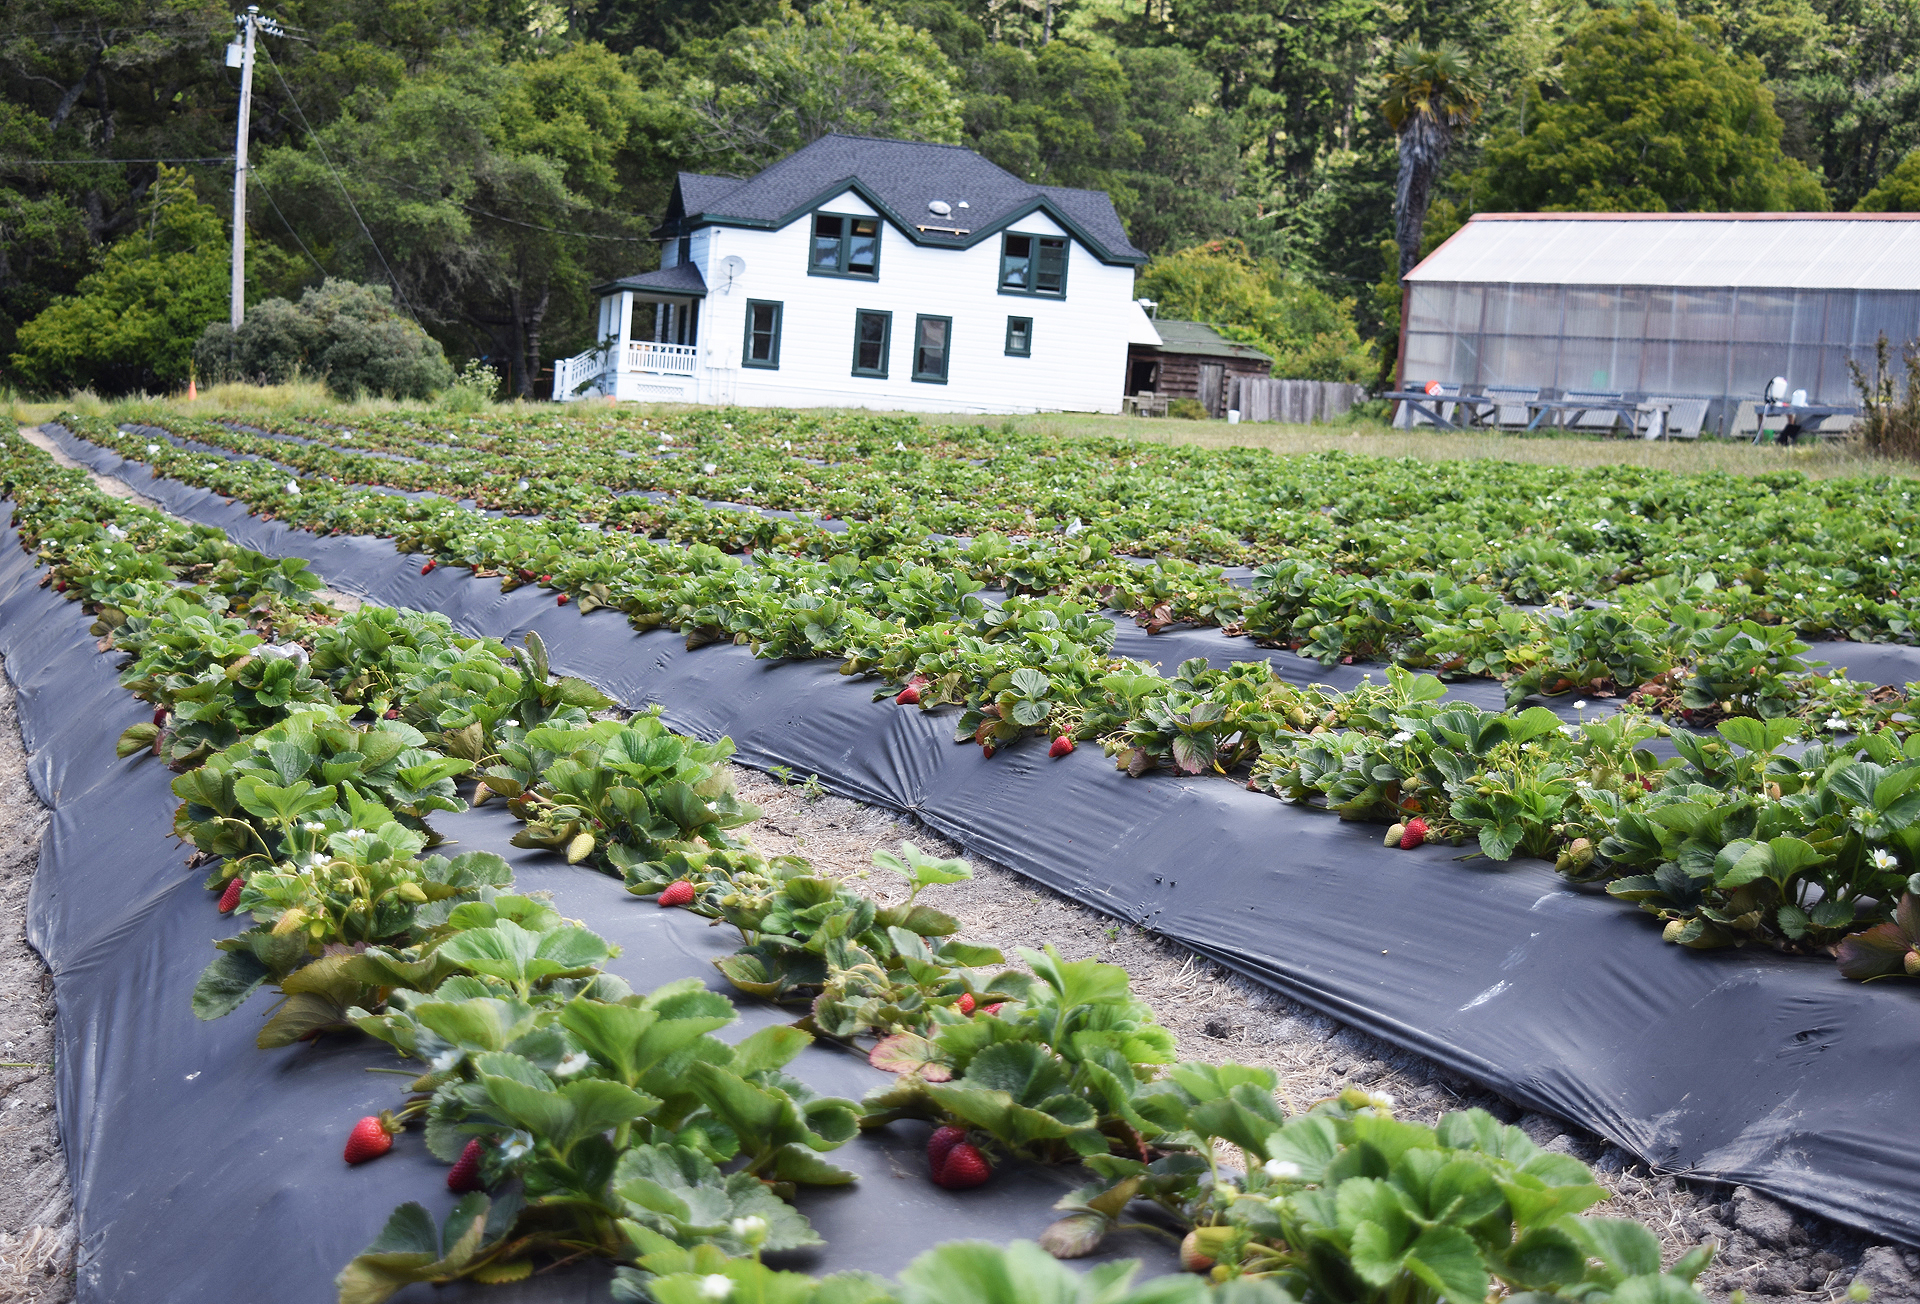 Seascape and Albion strawberries as well as other produce is grown at Green Oaks Creek Farm near the ocean in Pescadero.